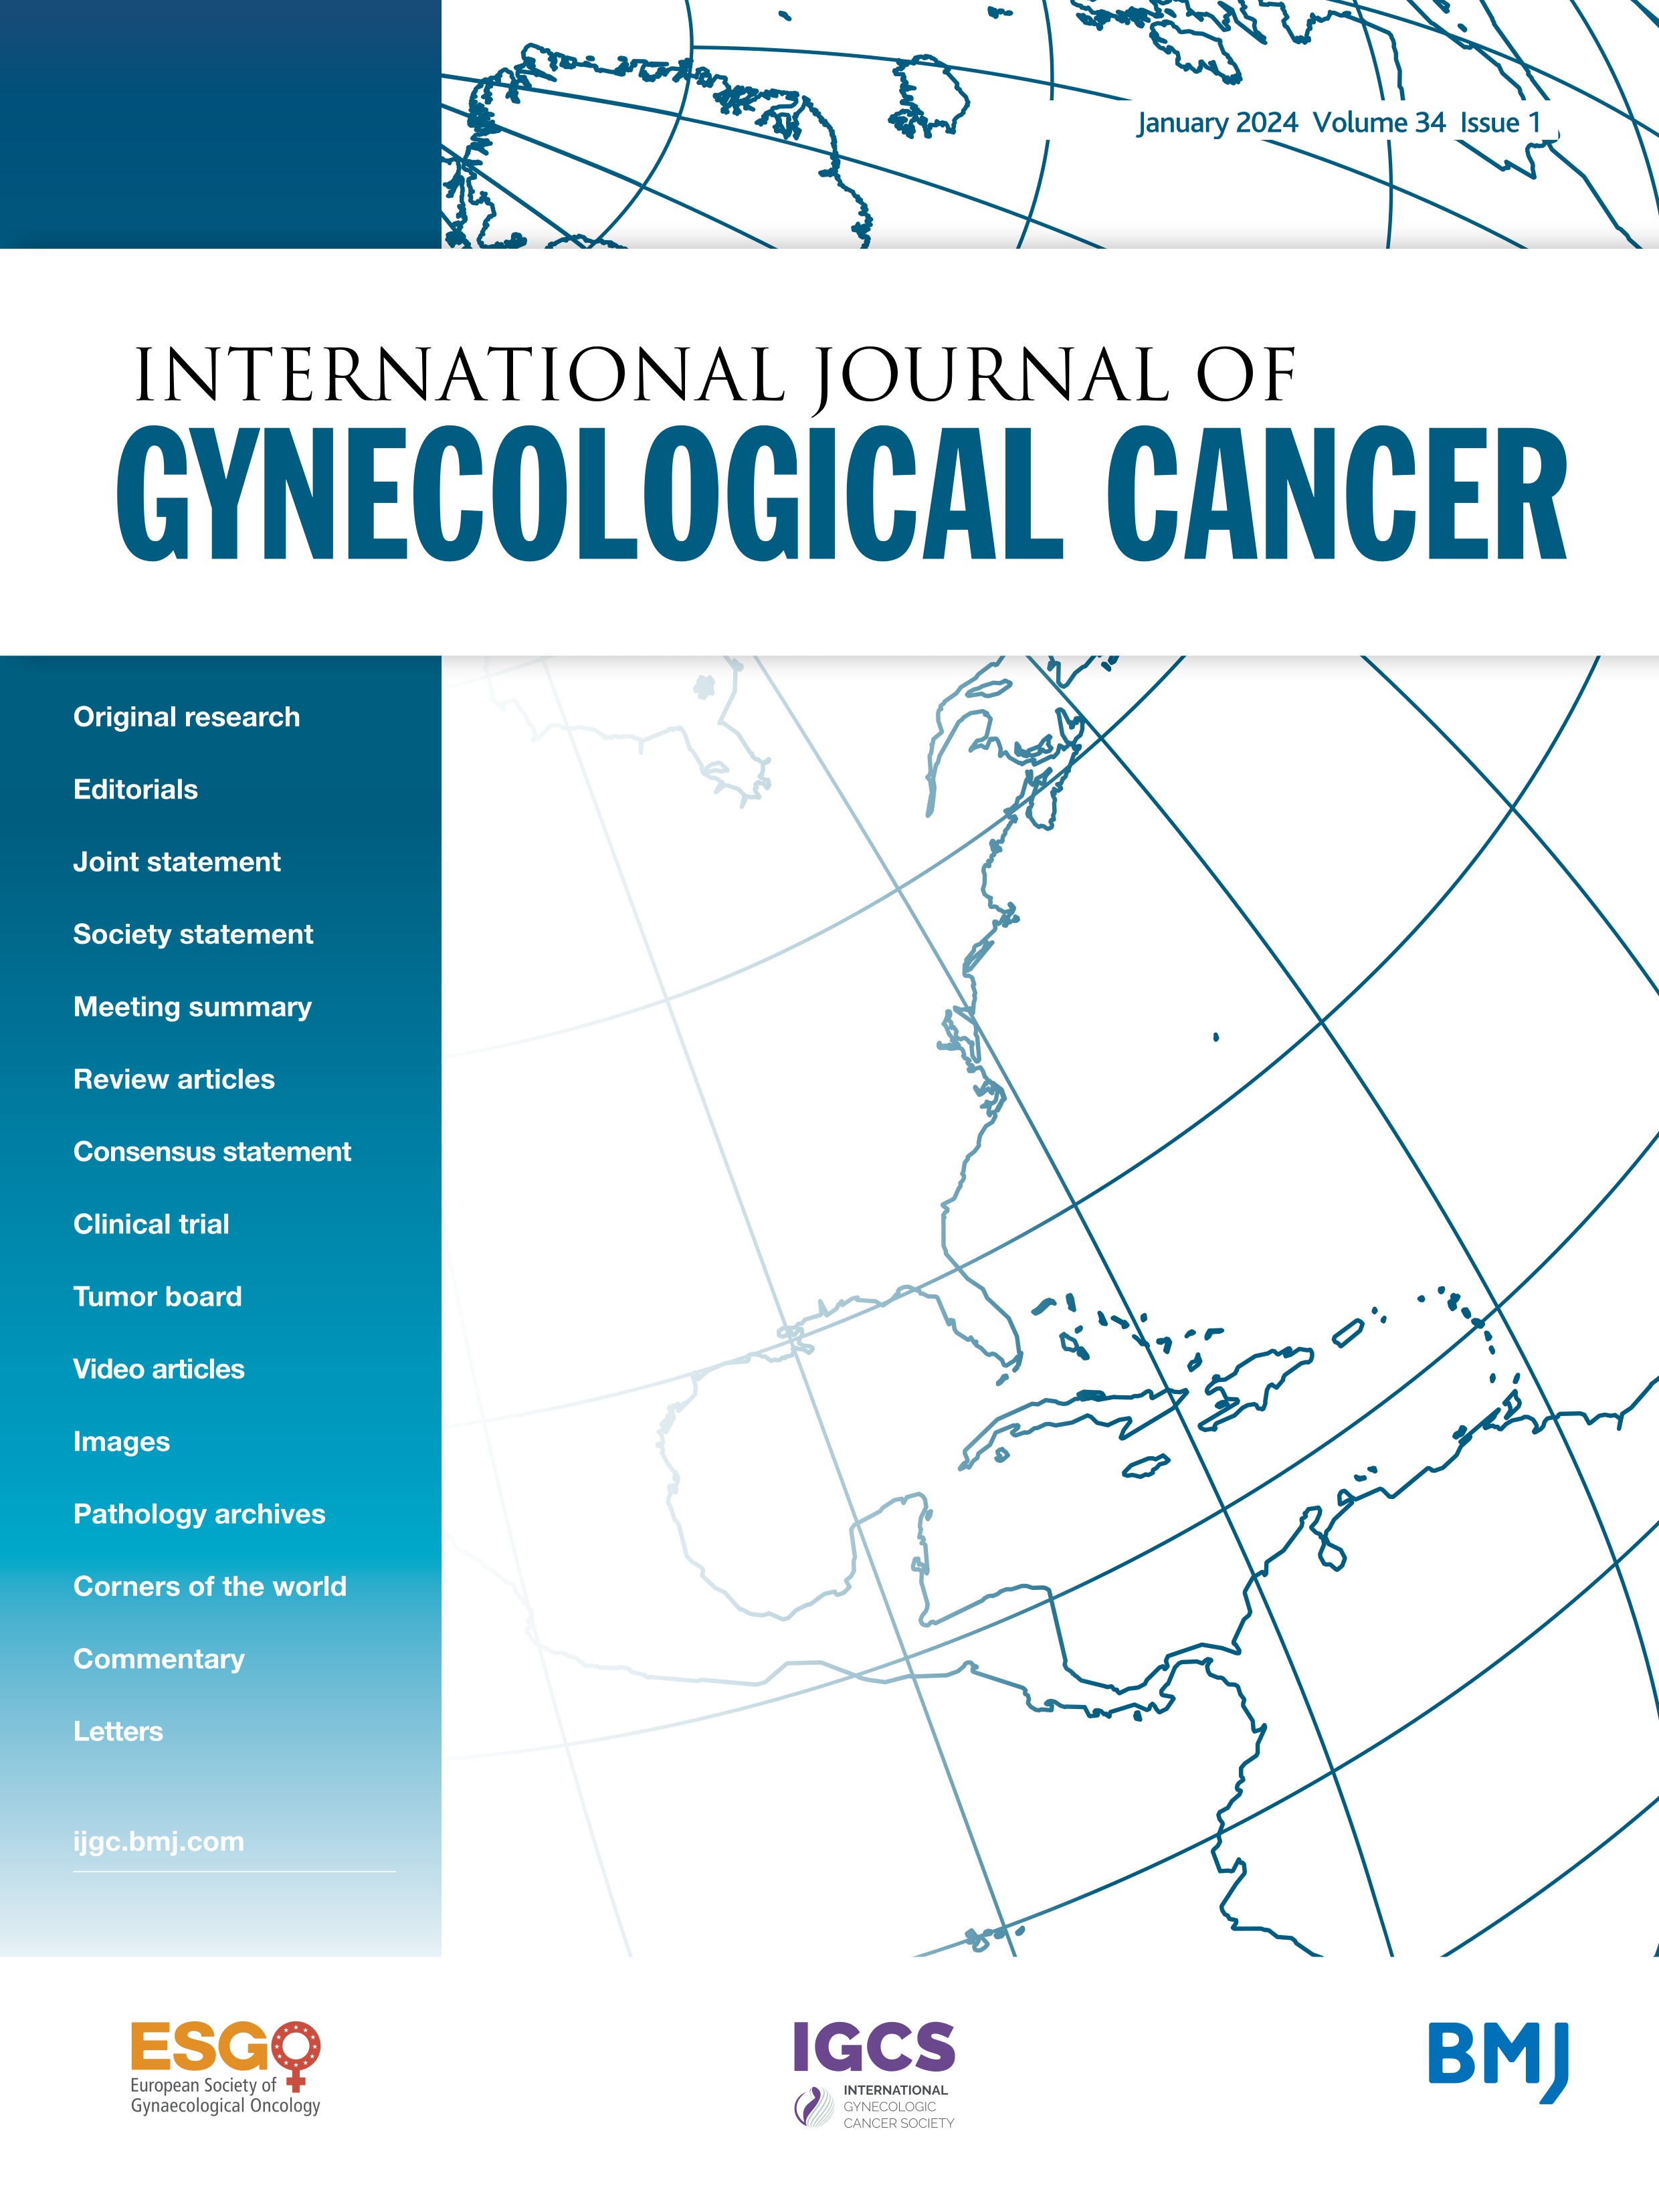 Pelvic floor dysfunction survivorship needs and referrals in the gynecologic oncology population: a narrative review